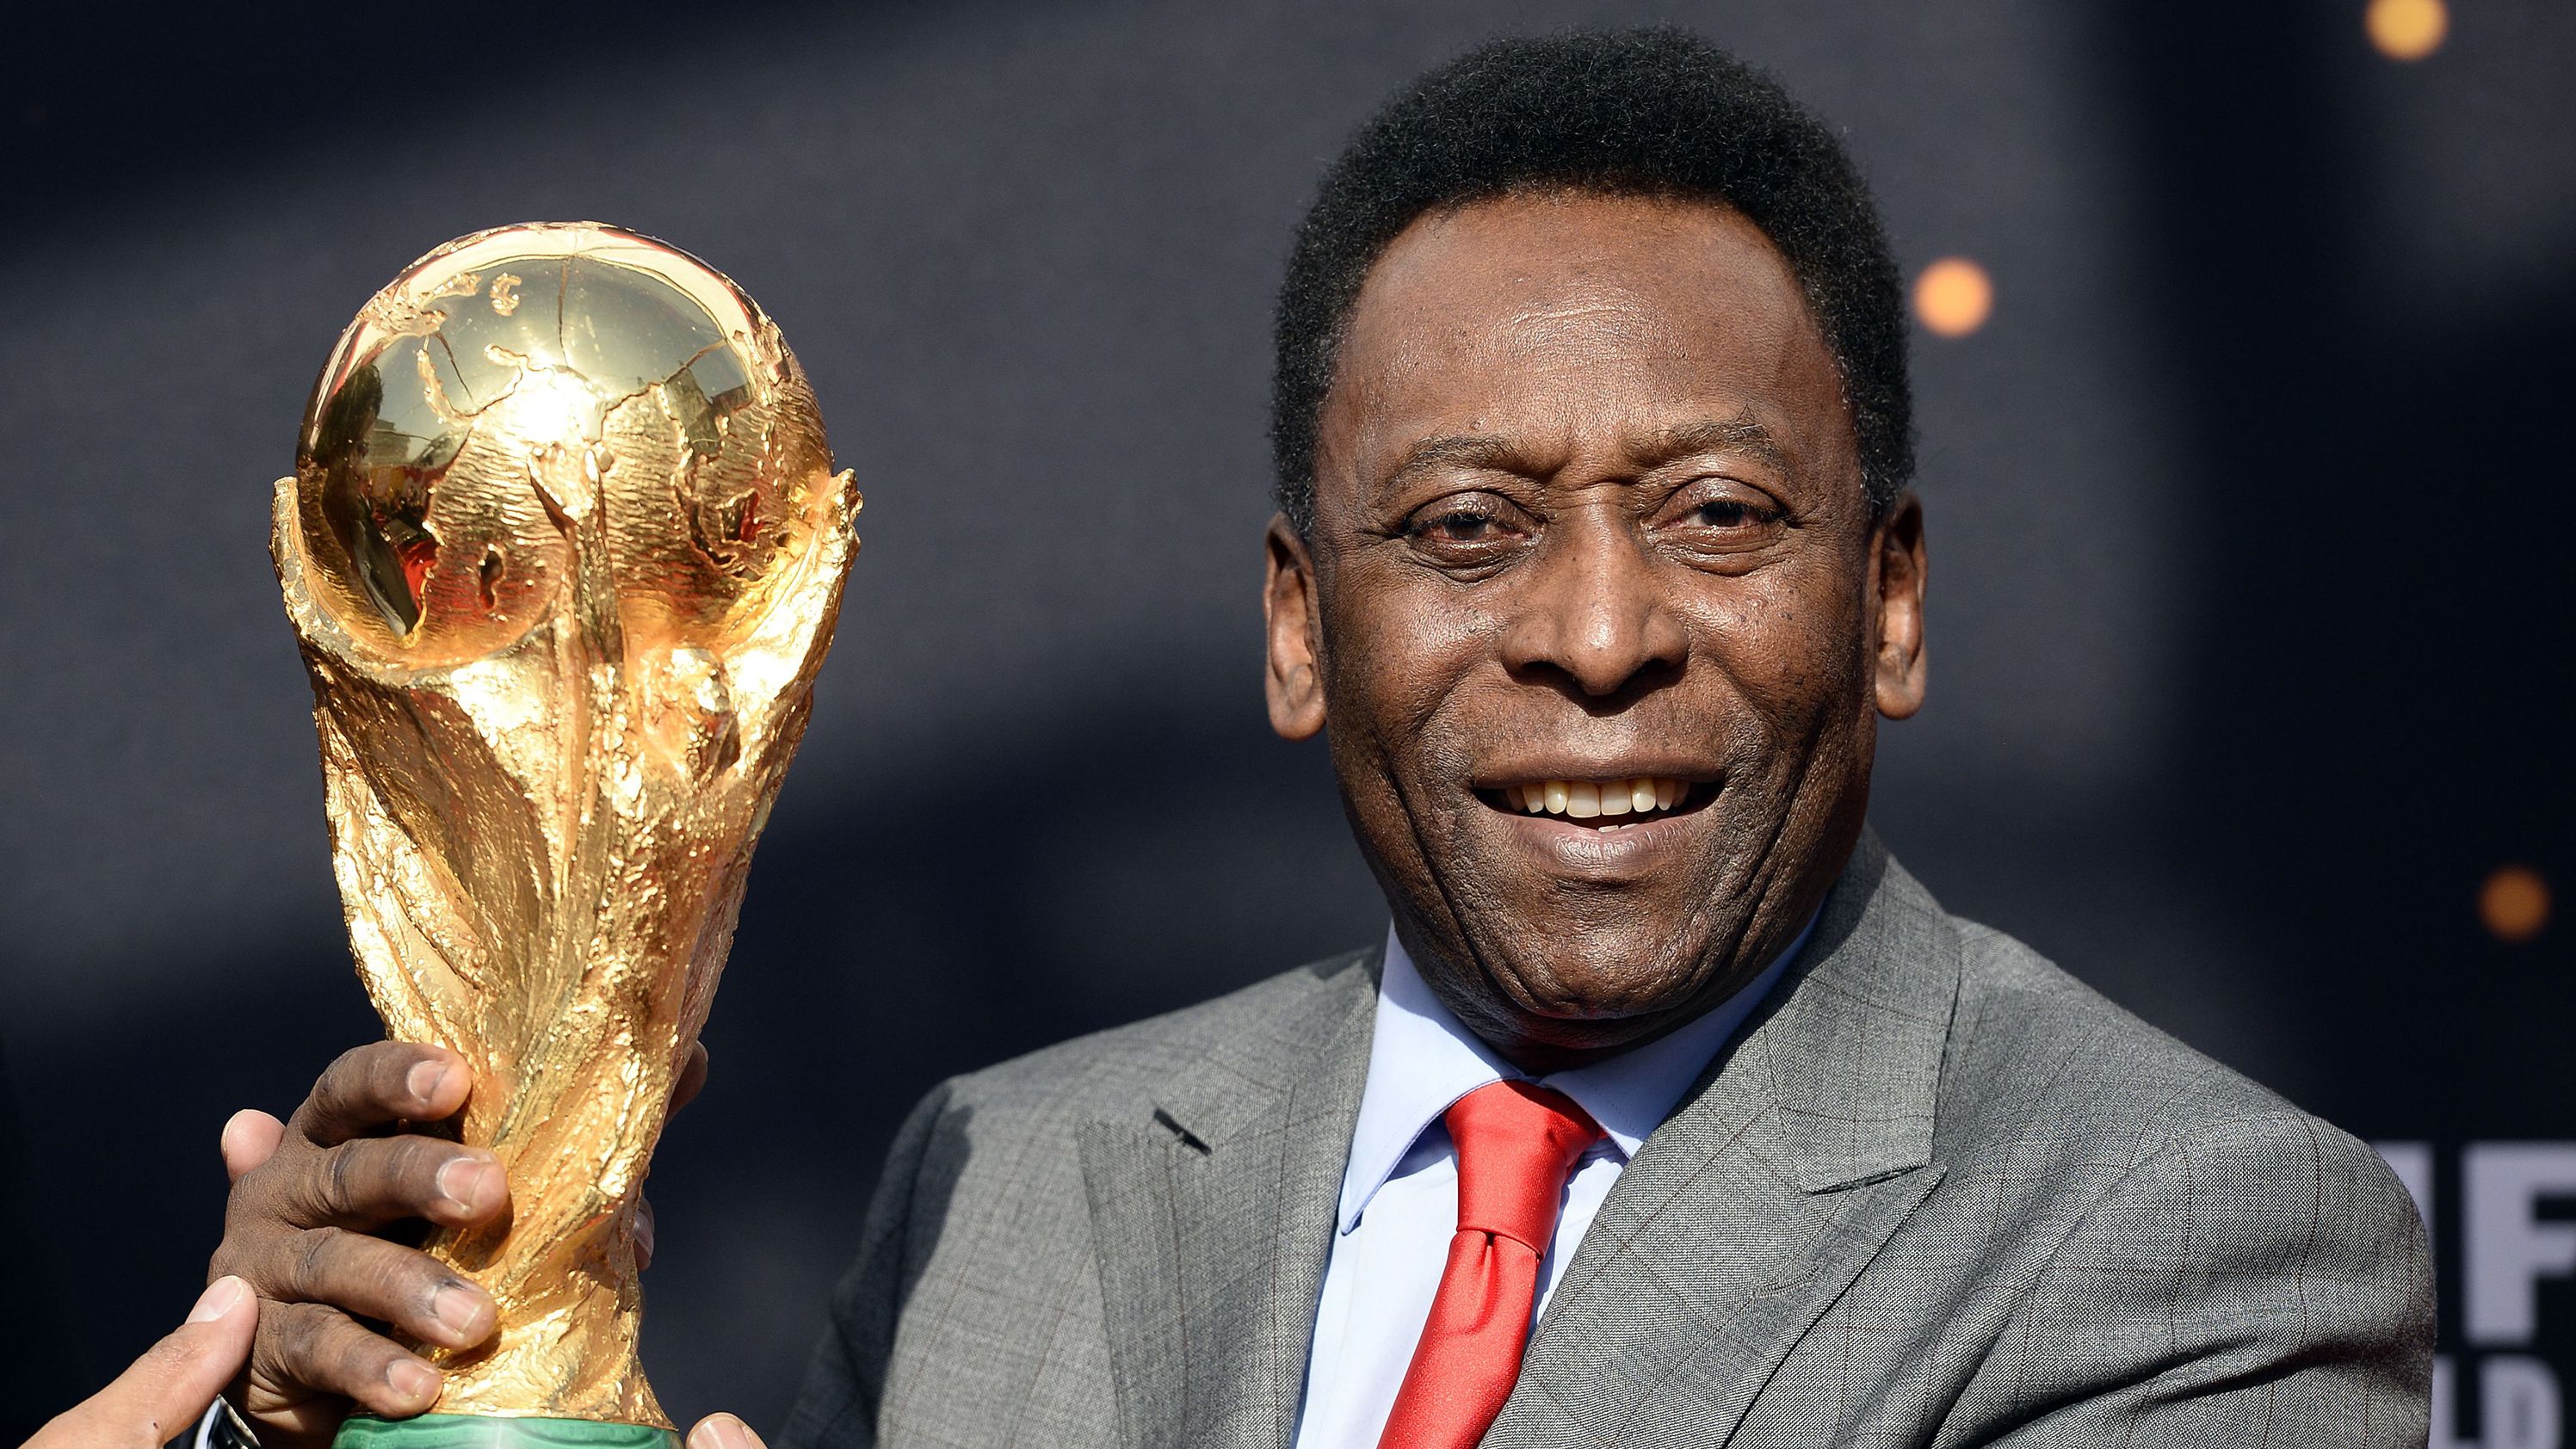 Pelé poses with the World Cup trophy on March 9, 2014 in Paris.